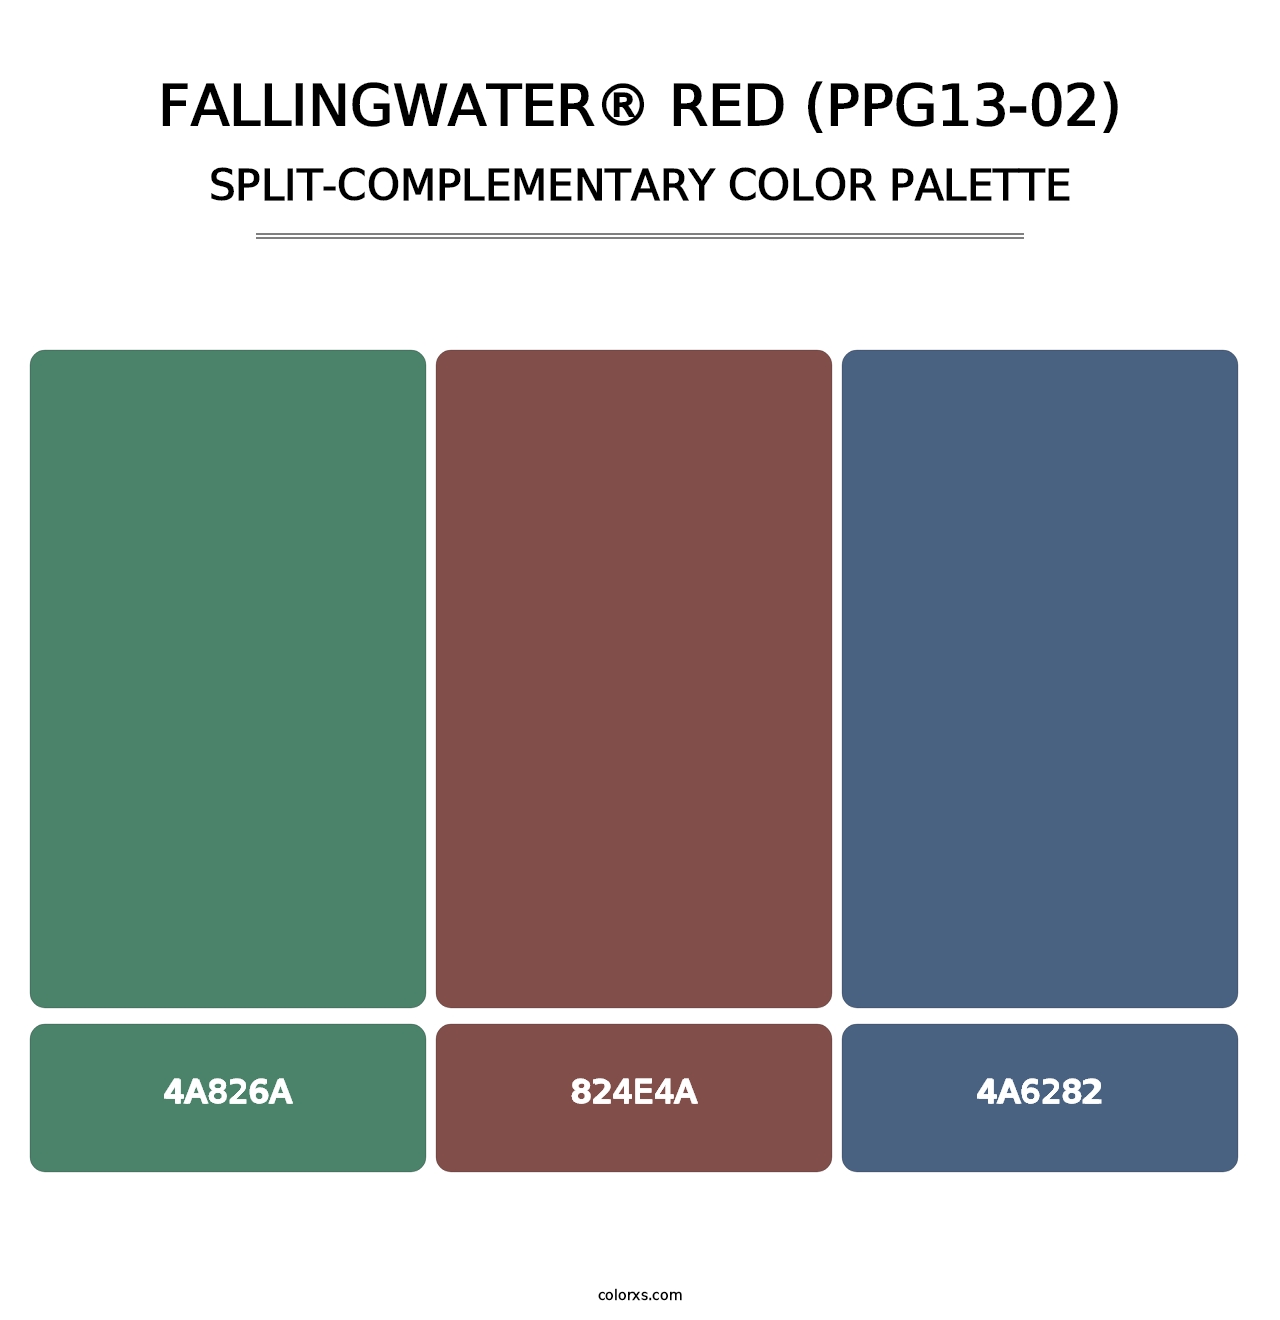 Fallingwater® Red (PPG13-02) - Split-Complementary Color Palette